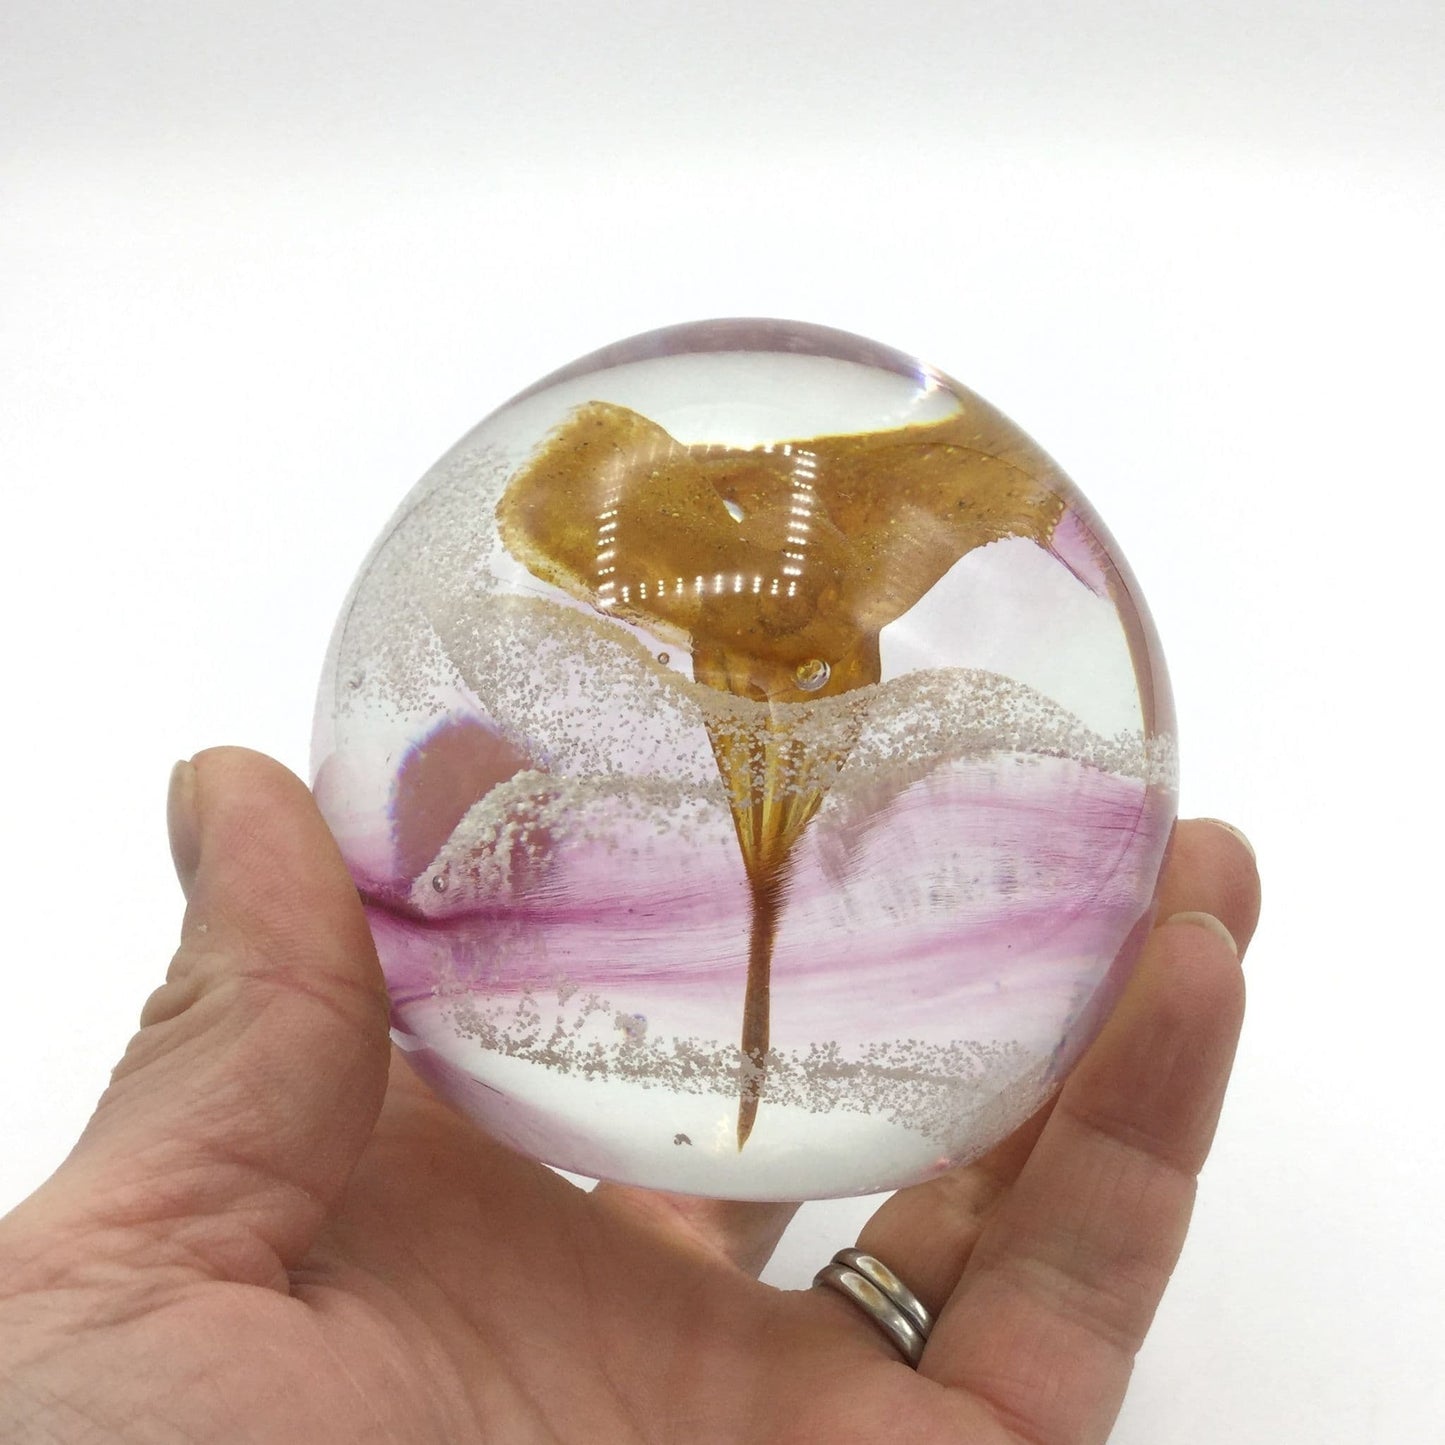 Caithness Glass Calypso Paperweight